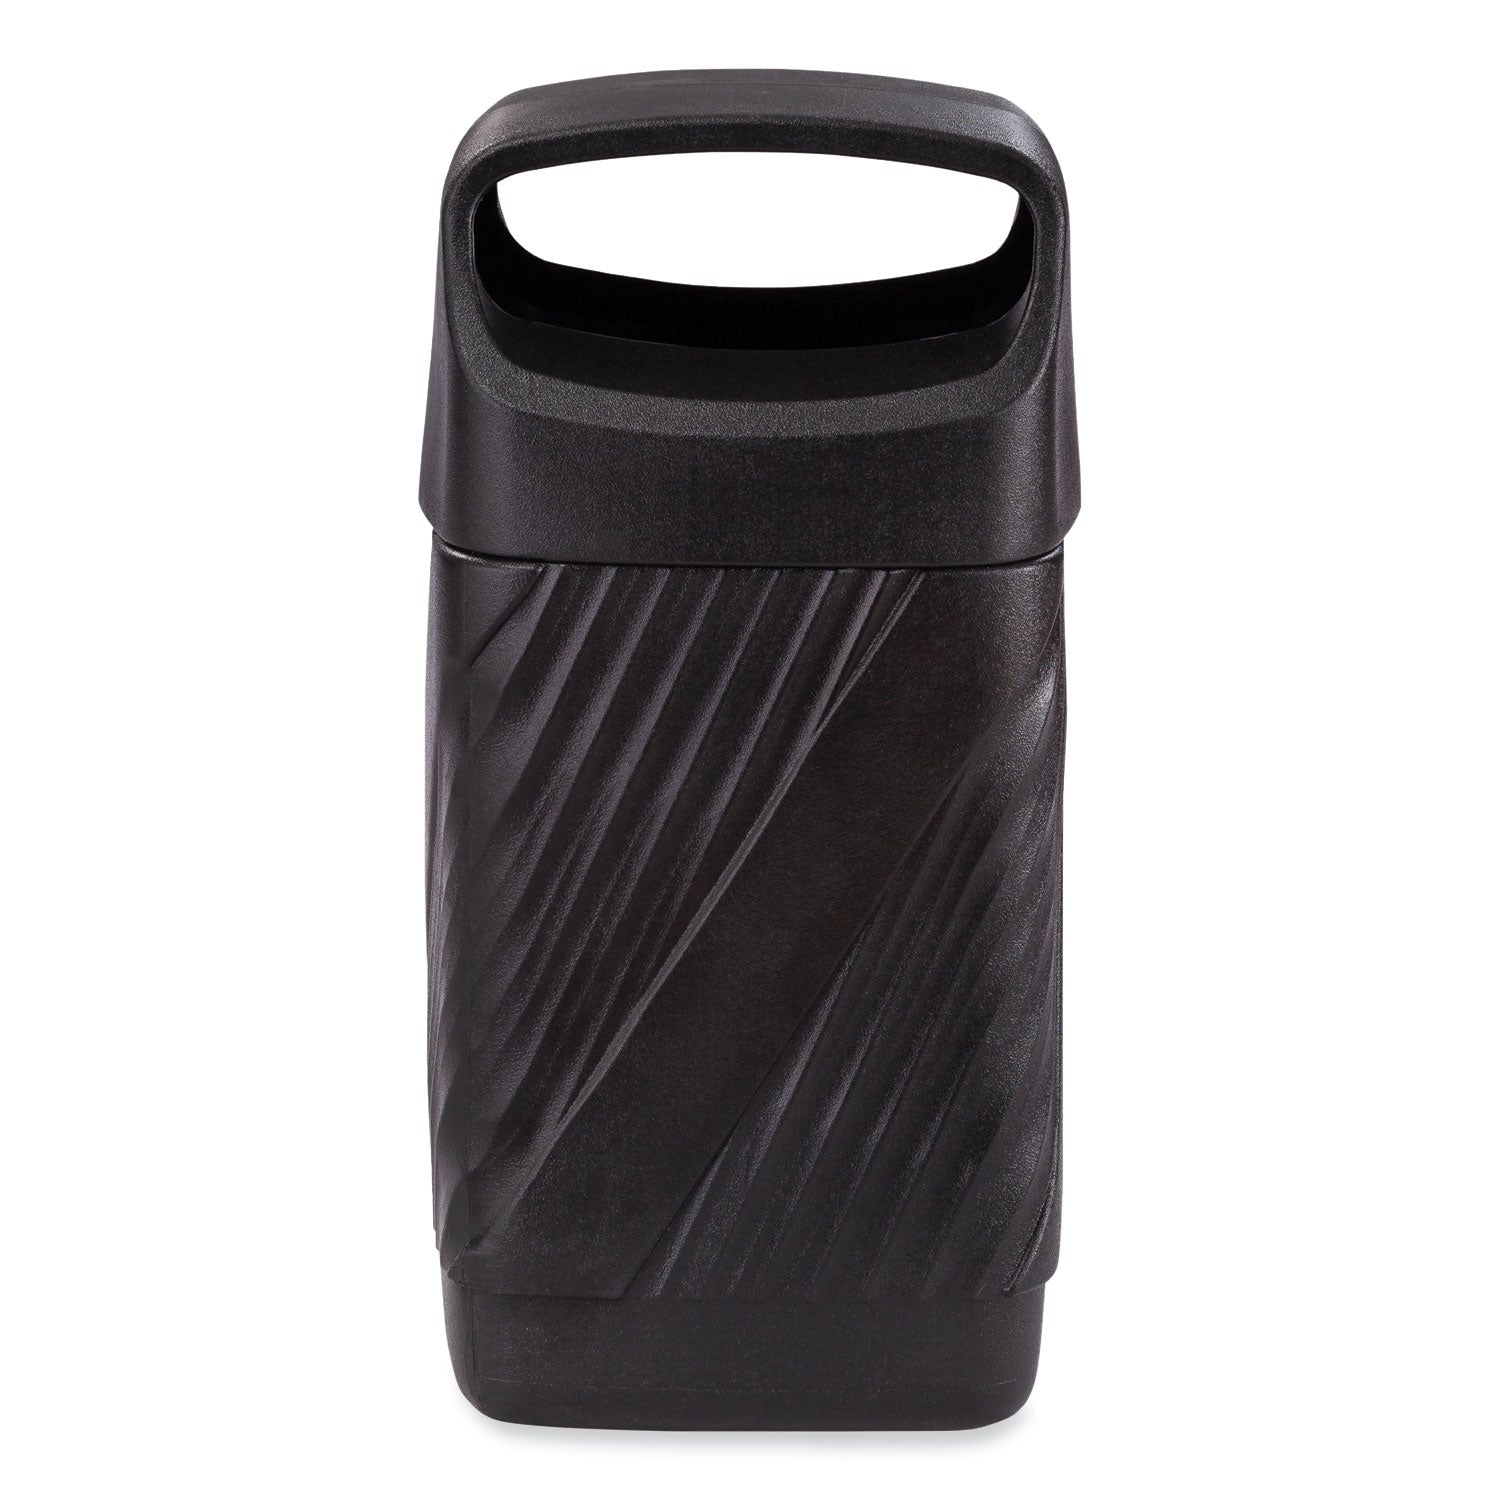 Safco Twist Waste Receptacle - 32 gal Capacity - Removable Lid, Durable, UV Resistant, Fade Resistant - 38" Height x 18.3" Width x 19.4" Depth - High-density Polyethylene (HDPE) - Black - 1 Each - 2